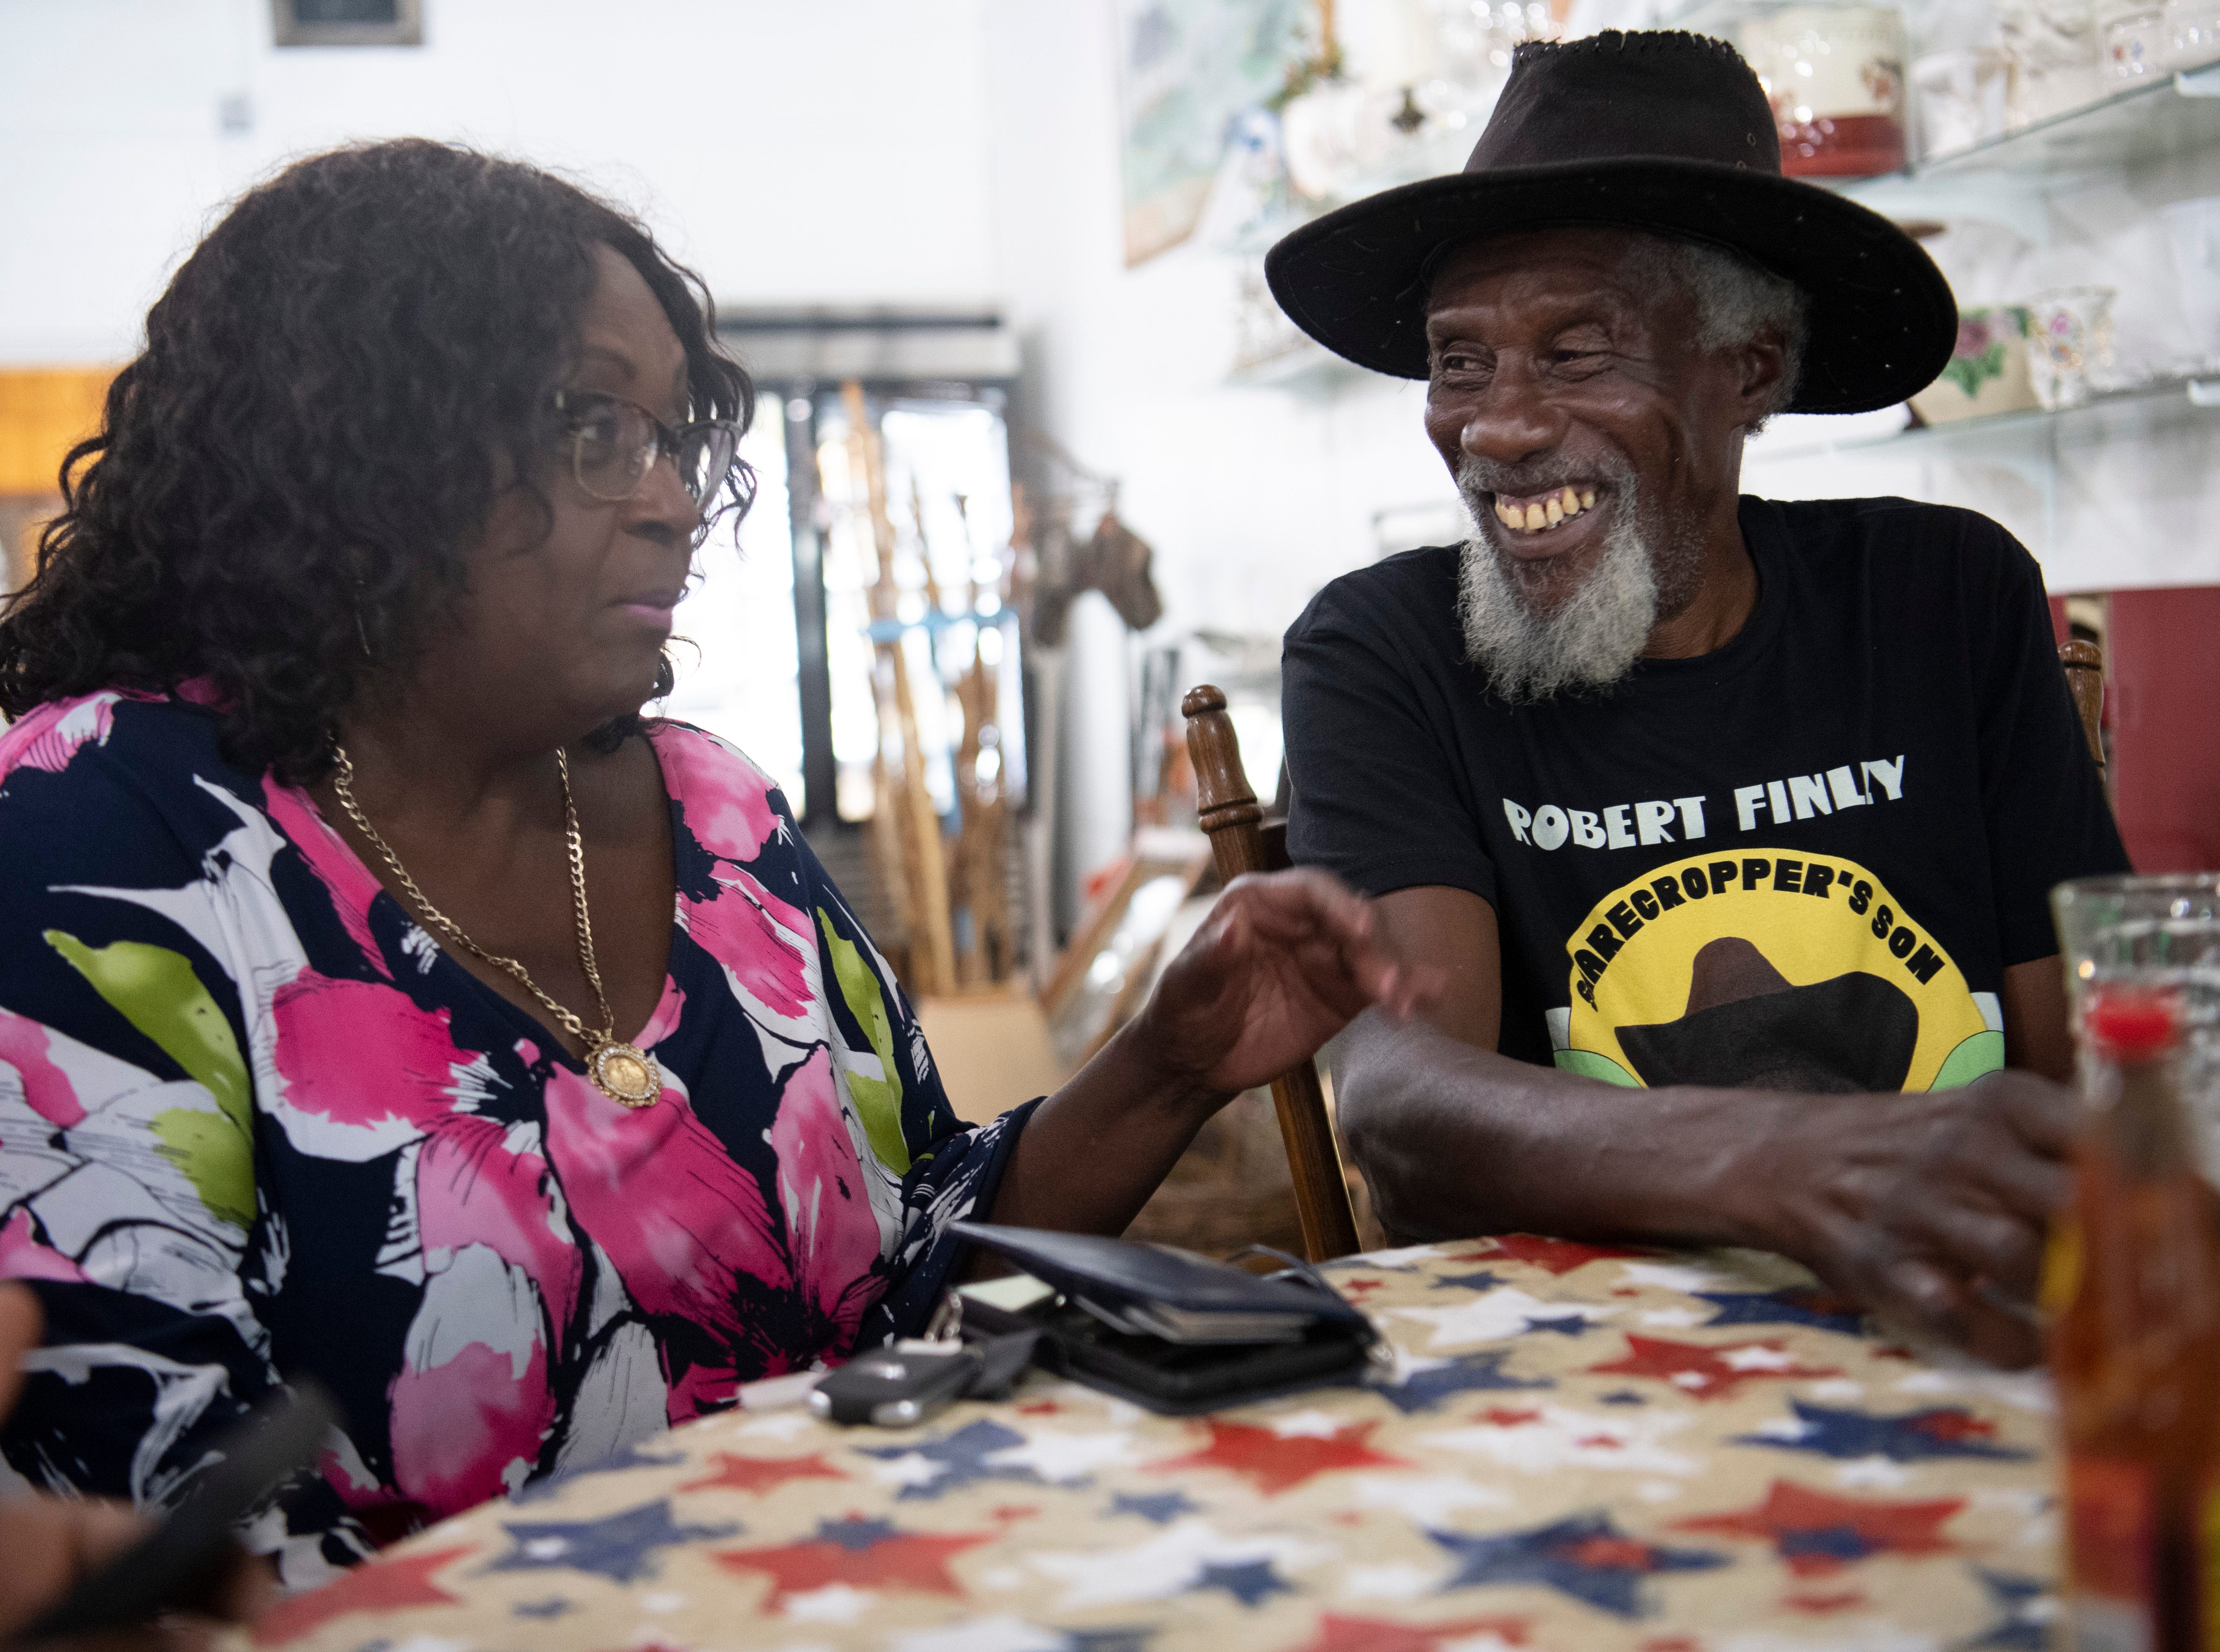 Mildred Ferguson gets ready to eat with Robert Finley at a restaurant in Bernice, La.  "He can sing with the kings and beggars, and he's the same," said Ferguson, who is the mayor of Bernice and a longtime friend. Photographed Friday, July 16, 2021.